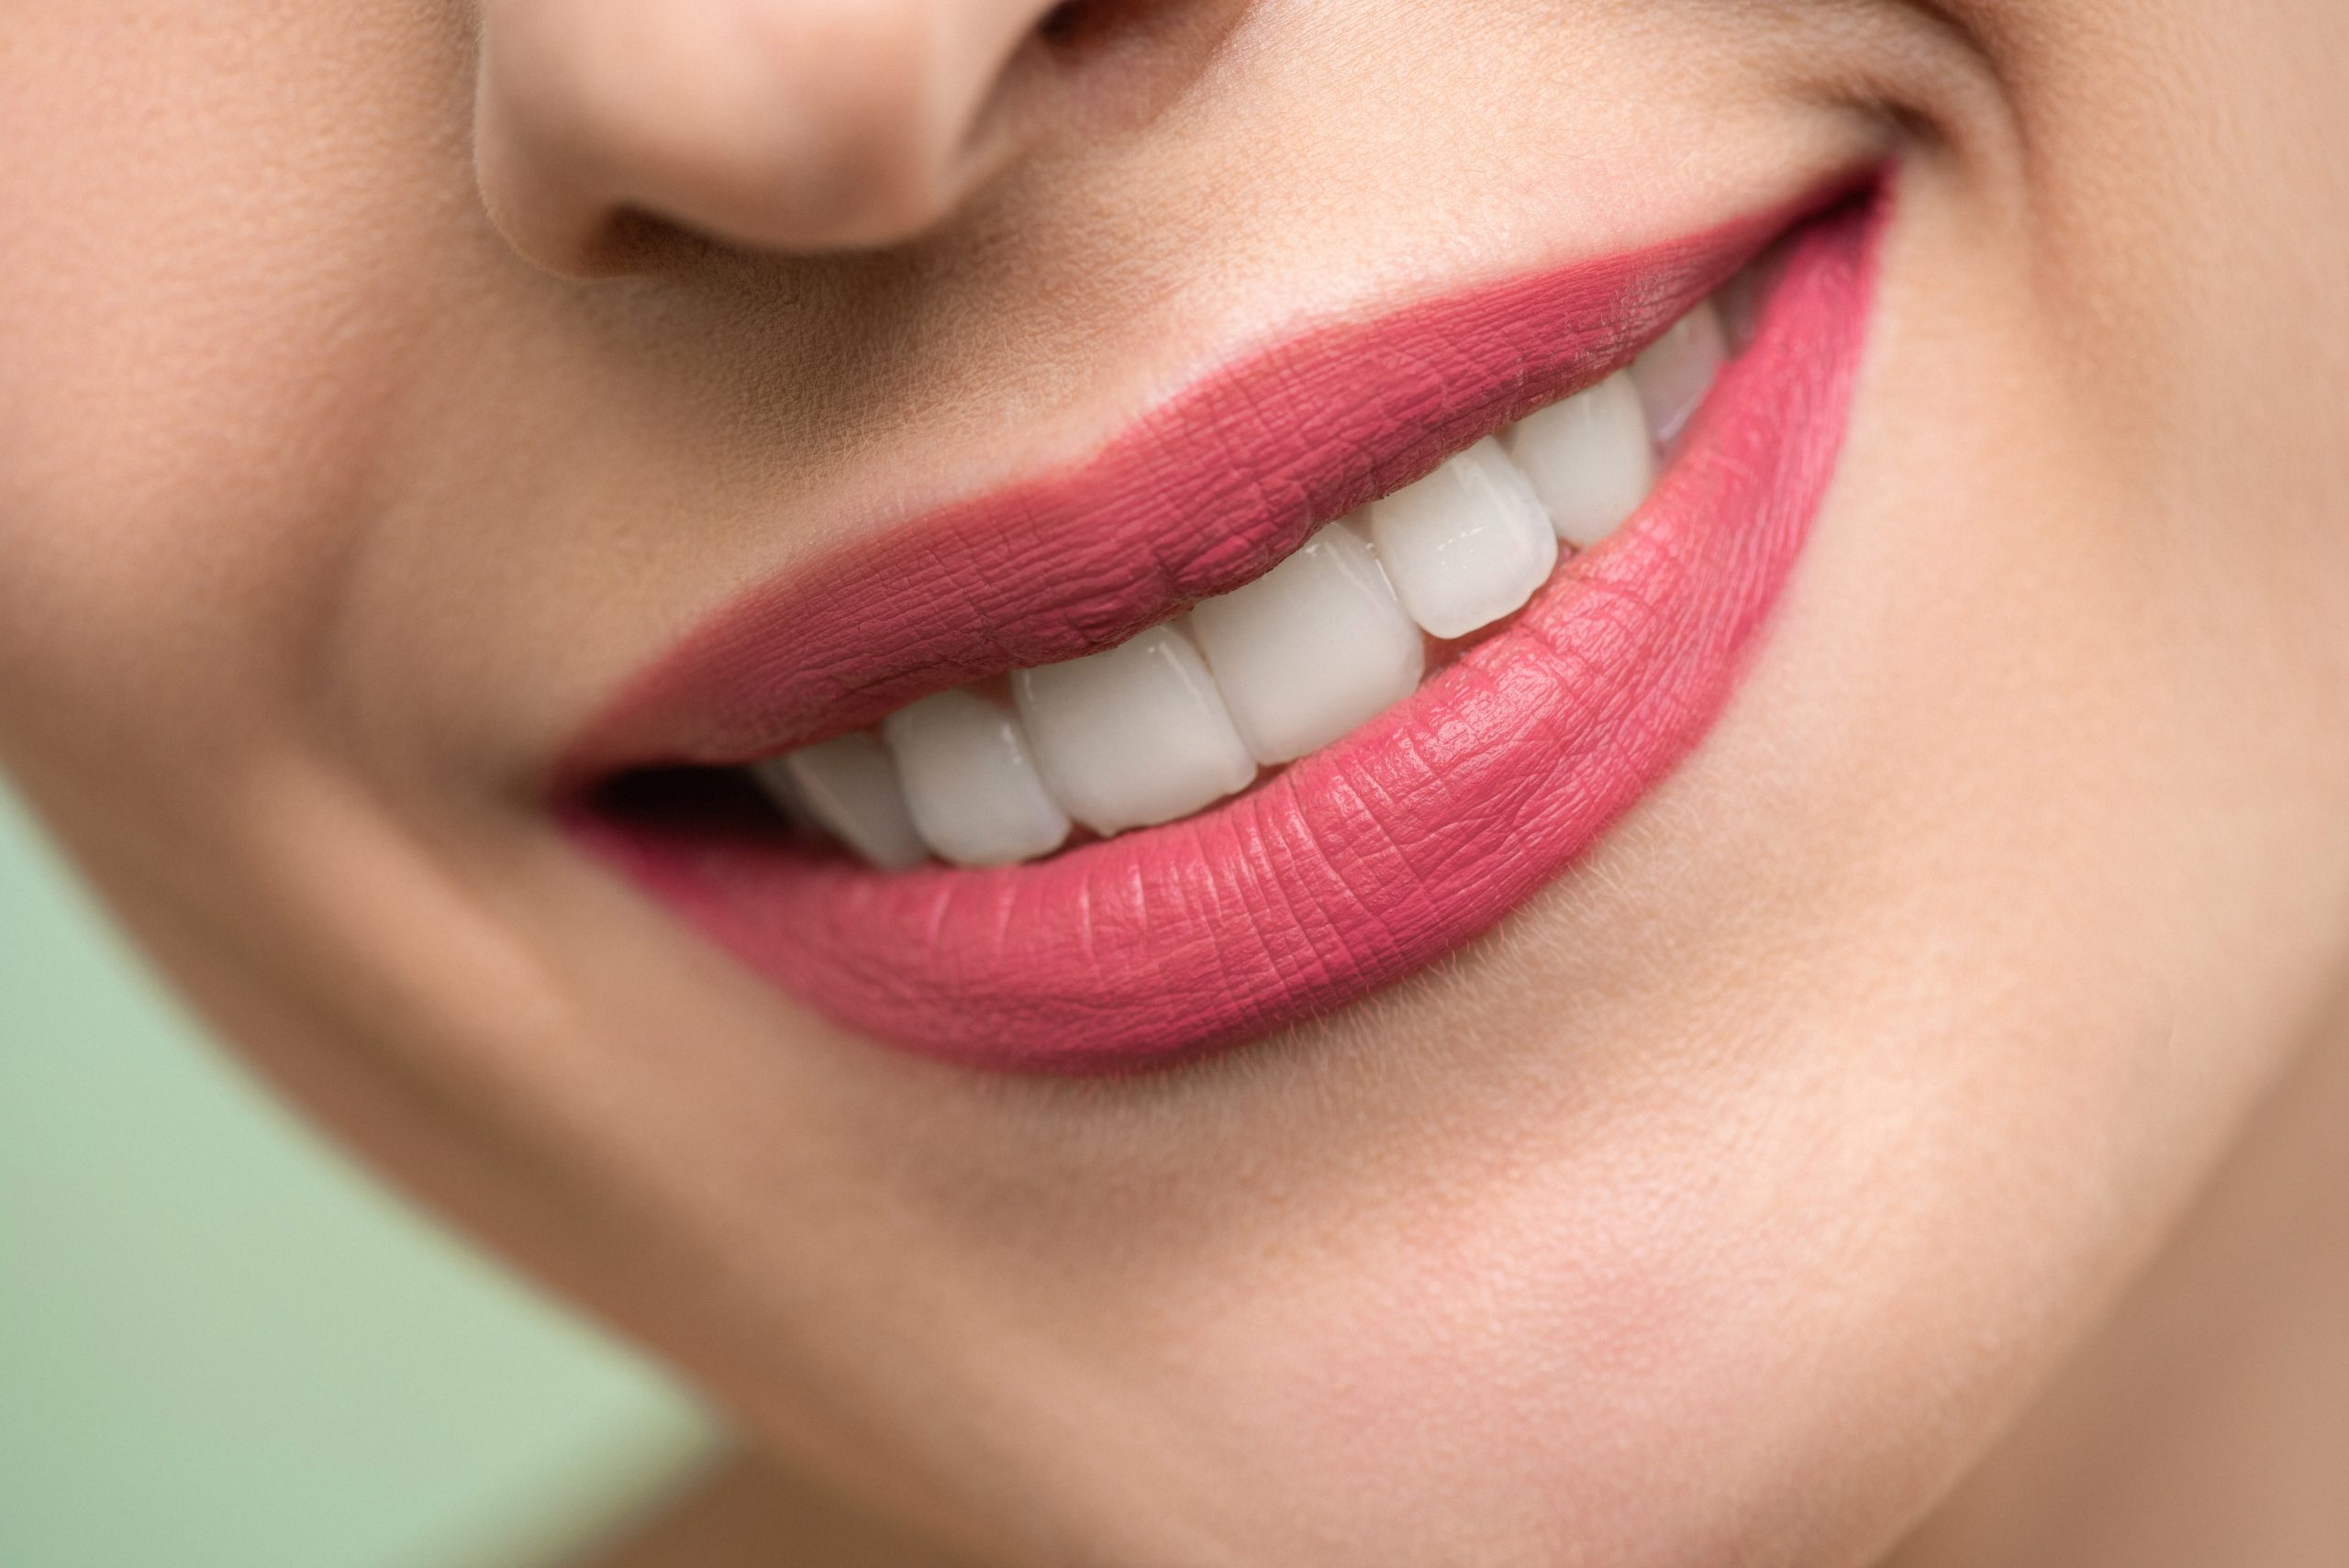 6 Dentist-Approved Tips to Safely Whiten Your Teeth